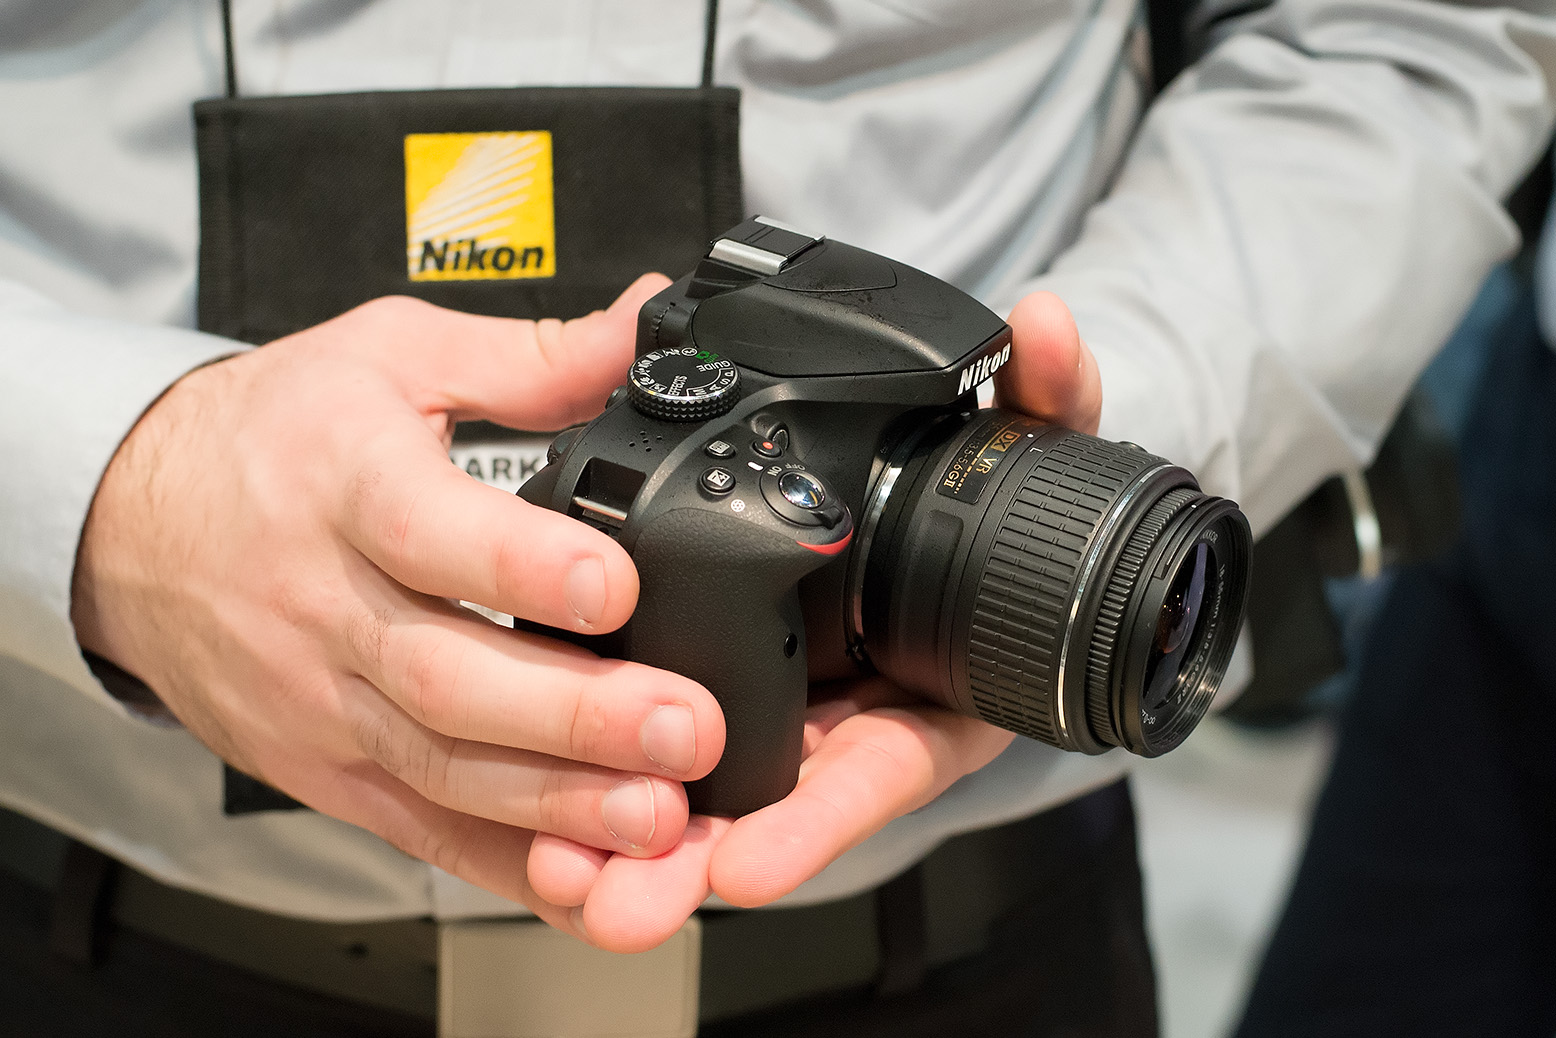 The-new-Nikon-D3300-DSLR-is-tiny-but-feels-much-more-balanced-than-similarly-sized-mirrorless-models